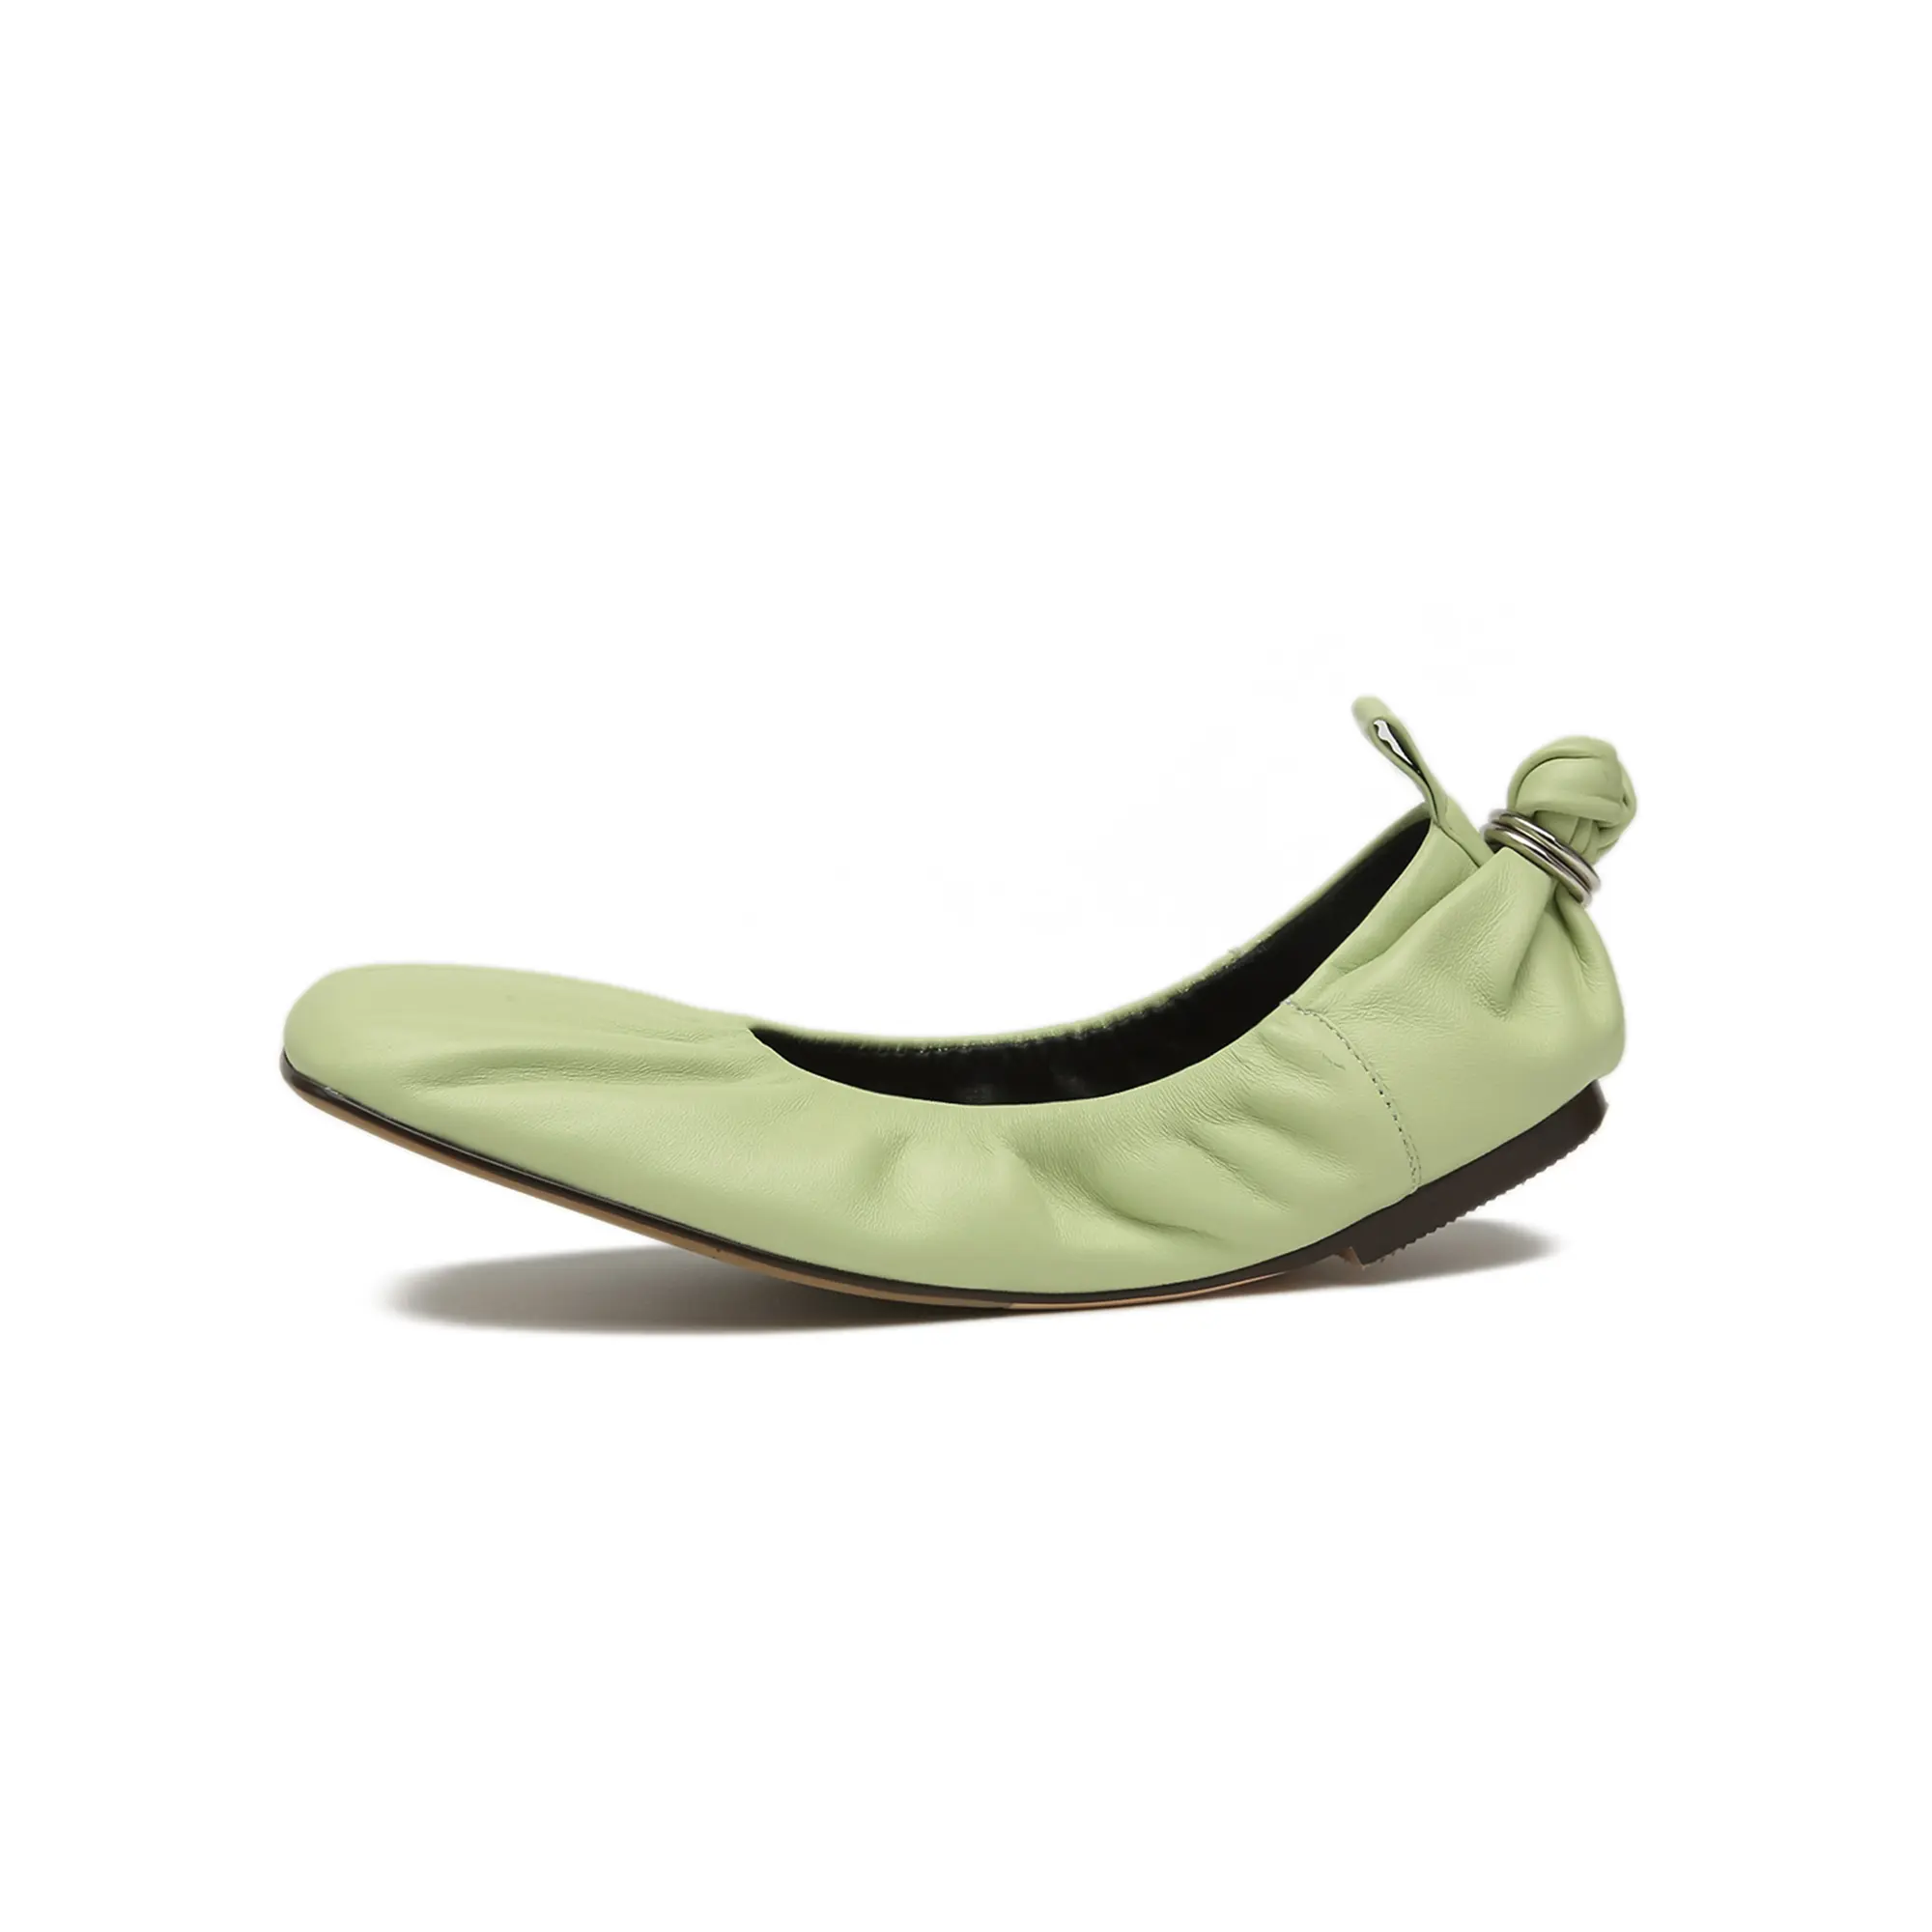 Daily Joker Style Soft And Comfortable Flats Foldable Flat Shoes 2022 New Design Pure And Fresh Fruit-Green Ballerina